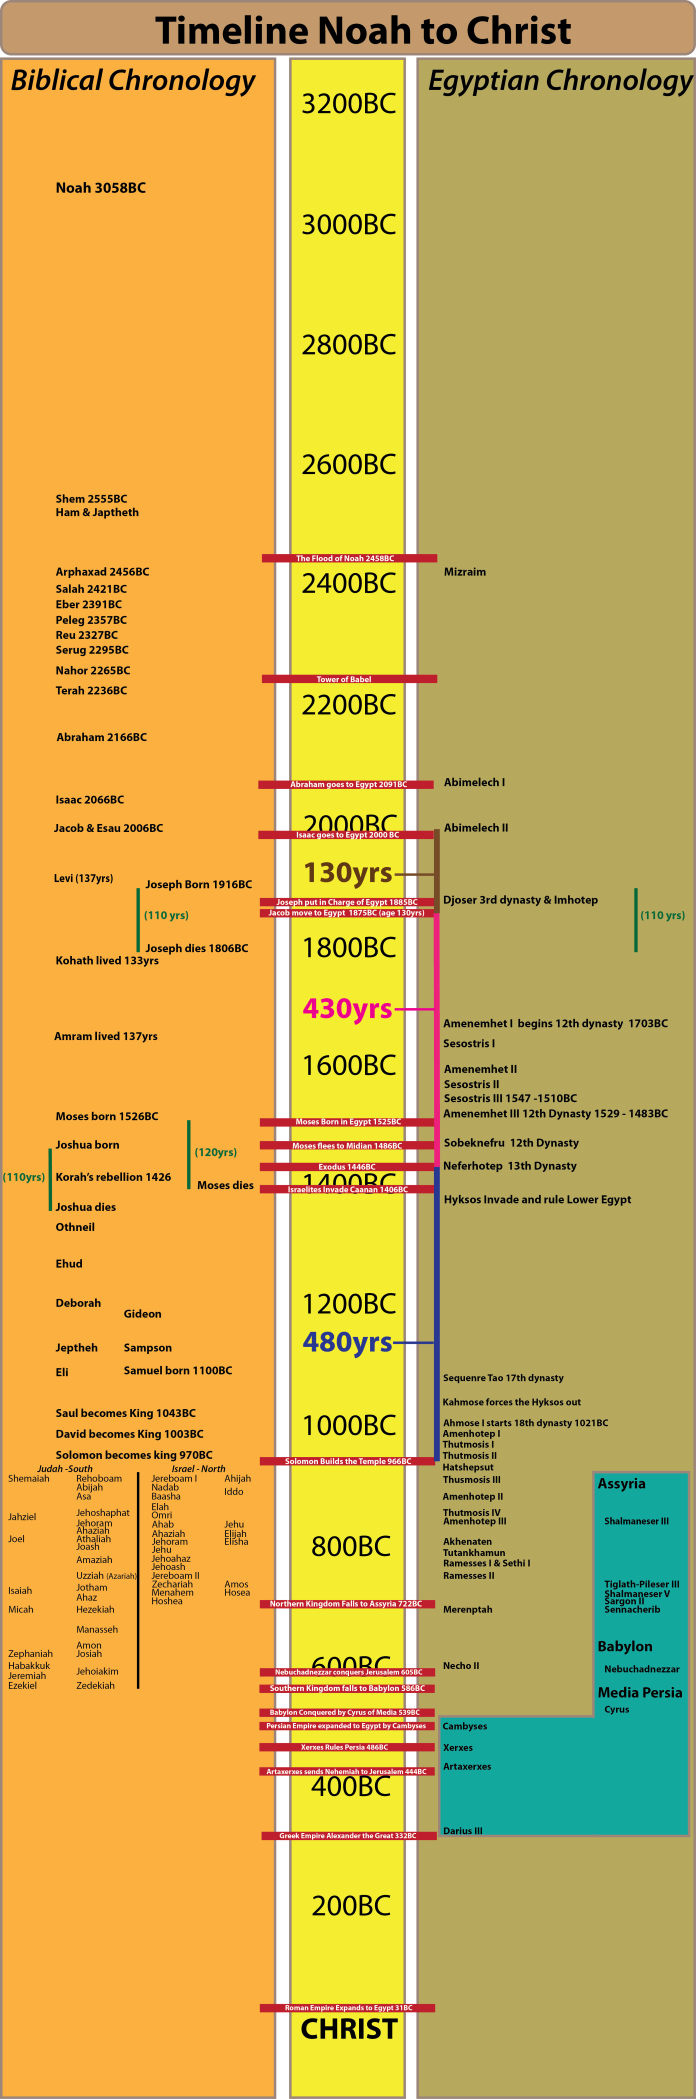 Time line from Noah to Christ David Down's revised Egyptian Chronology. Biblical dates consistent with a long sojourn. 